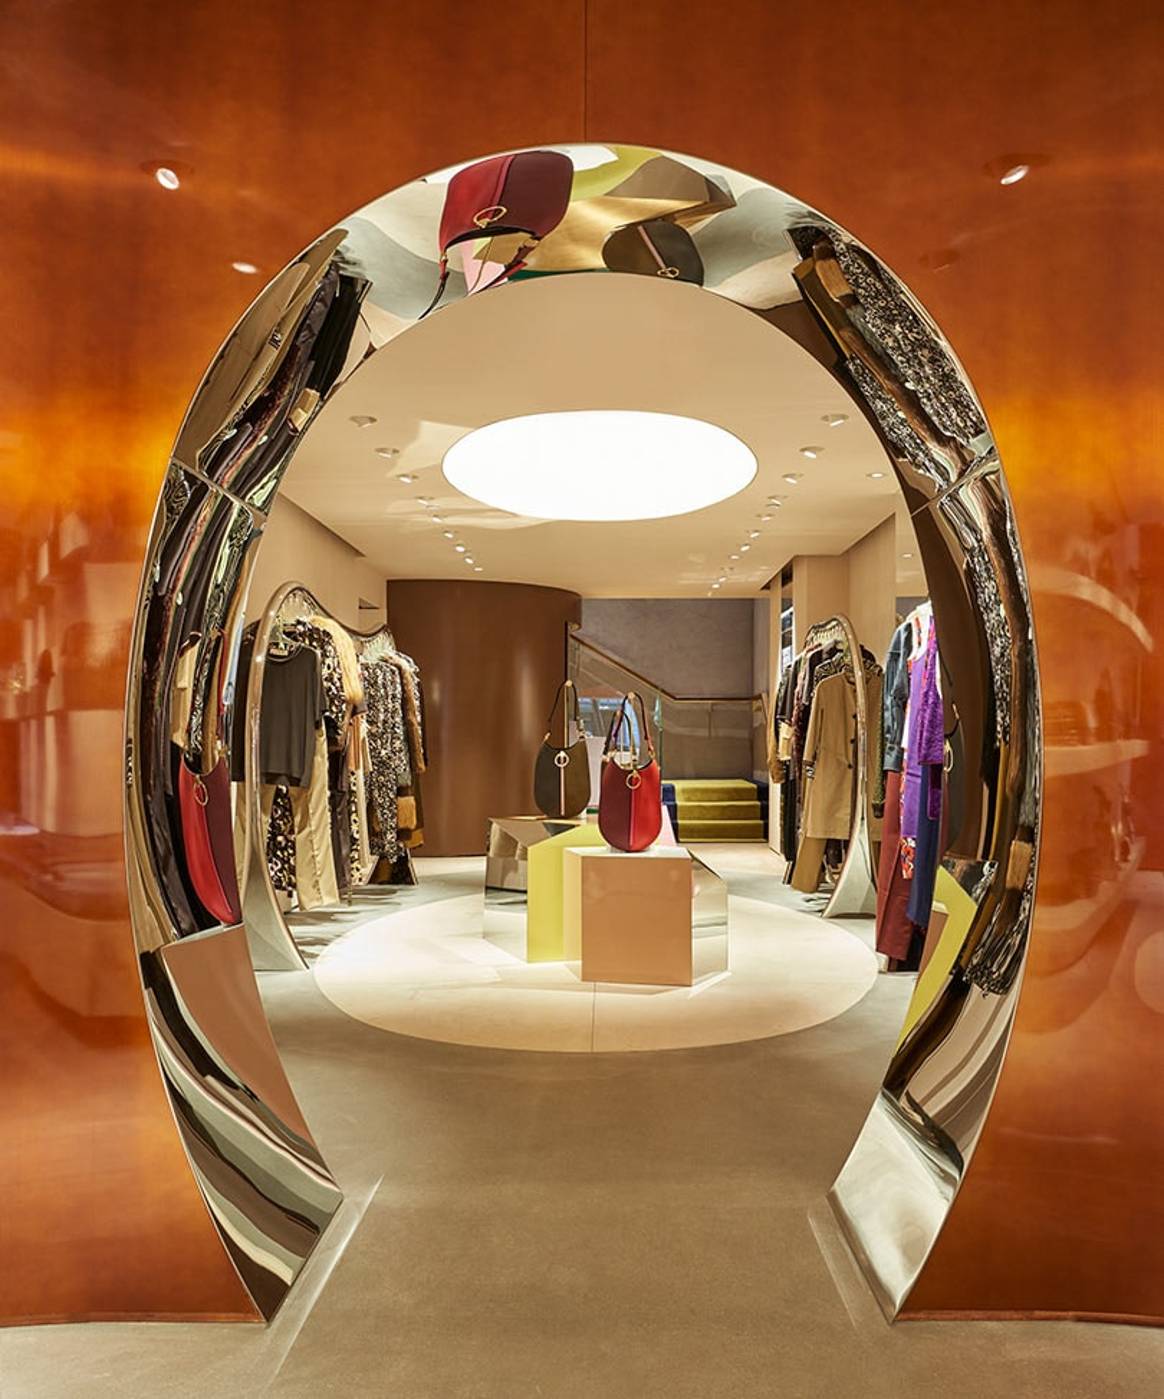 Marni opens new flagship store in New York